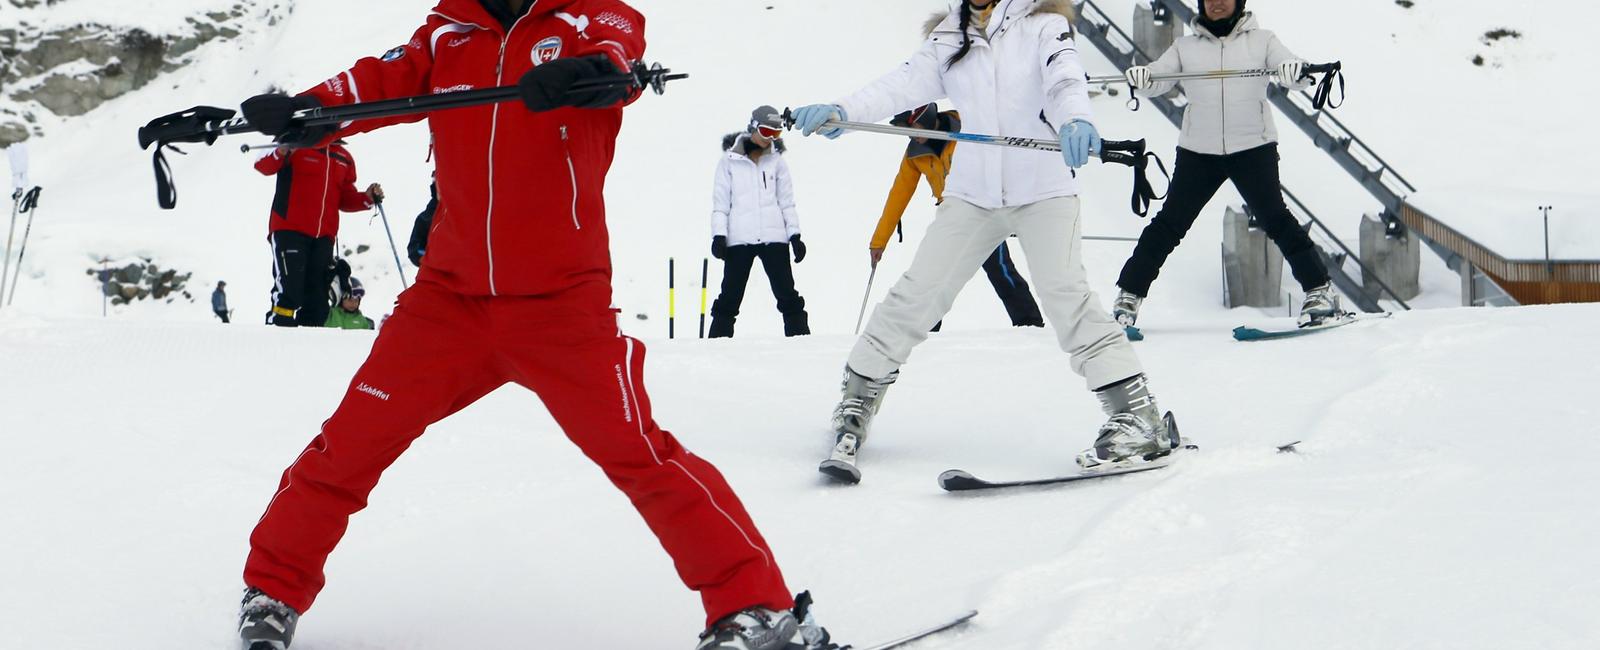 Ten years ago only 500 people in china could ski this year an estimated 5 000 000 chinese will visit ski resorts